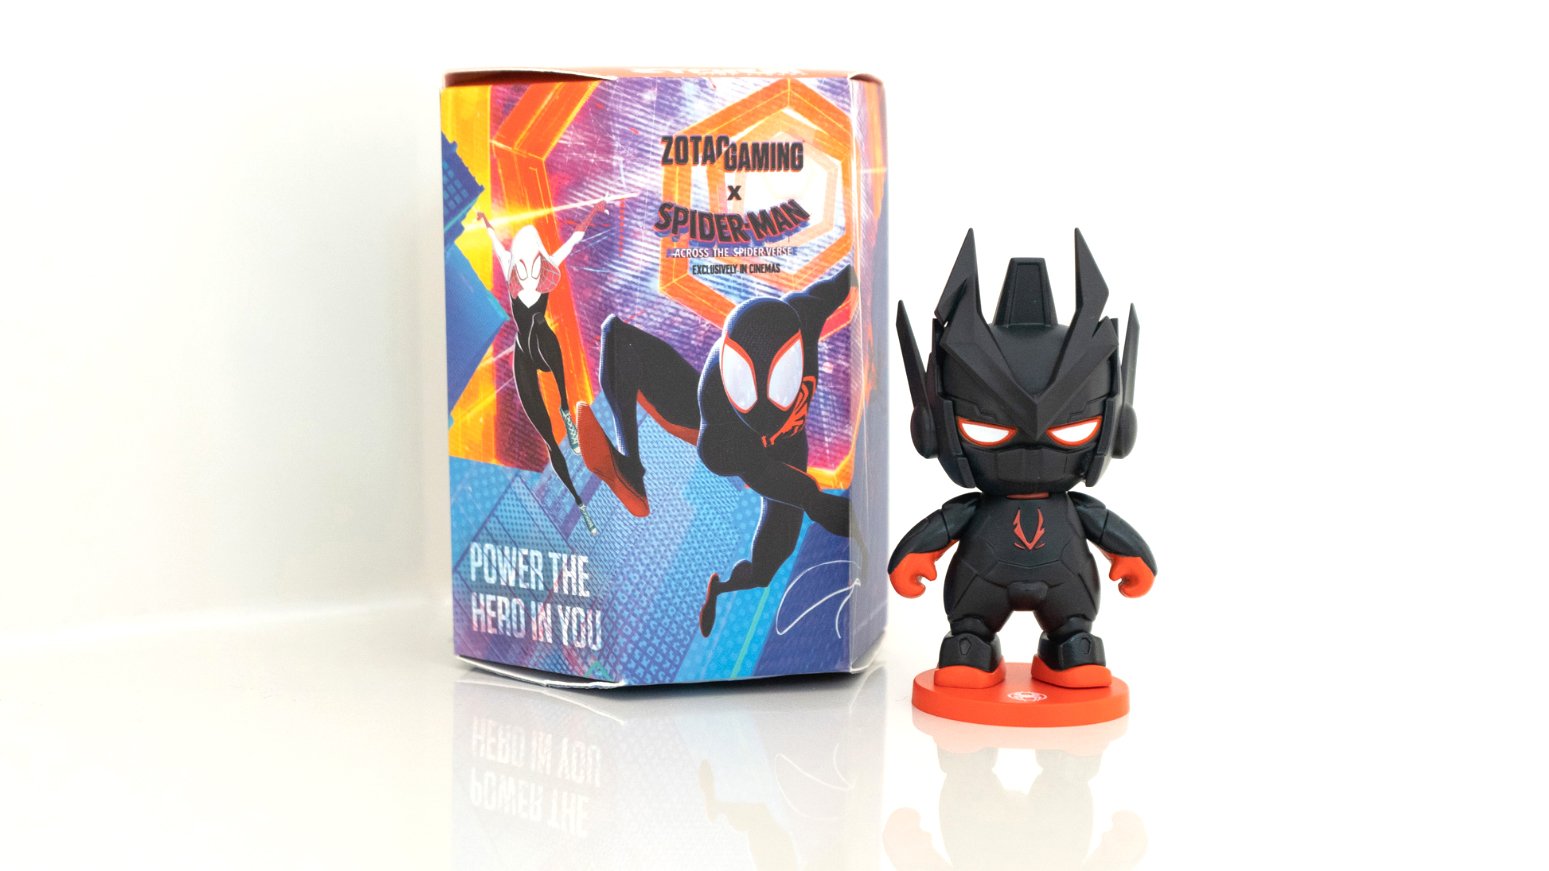 <br />
<h2 style='font-style:italic;'>Spider-Man™: Across the Spider-Verse Inspired Ztorm Figurines</h2>
<p>ZOTAC’s beloved ZTORM mascots have donned the iconic suits of Miles Morales, Gwen Stacy, and Spider-Man 2099!</p>
<p>Only one of the three exclusive SPIDER-ZTORM figures will come with each bundle! Which Spider-ZTORM will enter your world?</p>
<p>